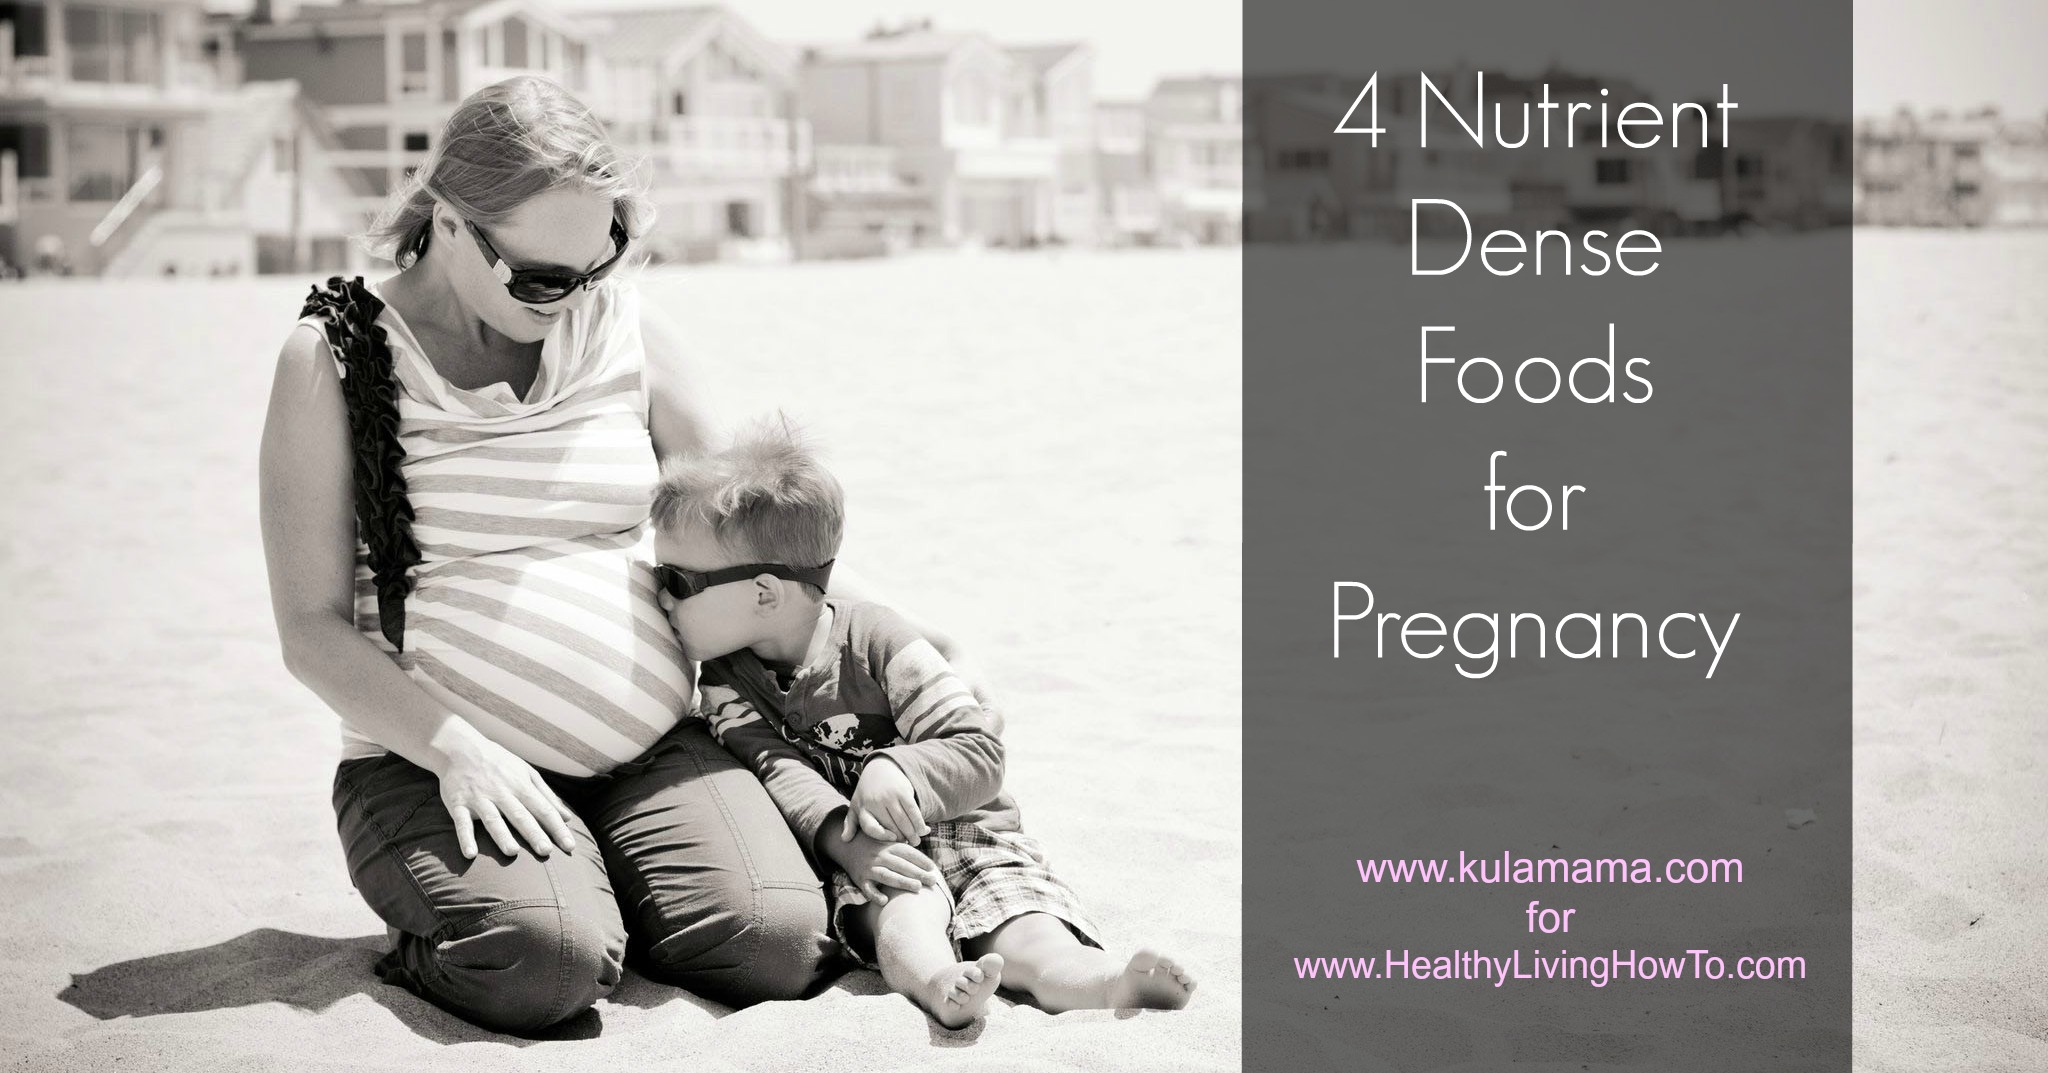 4 Nutrient Dense Foods to Eat During Pregnancy